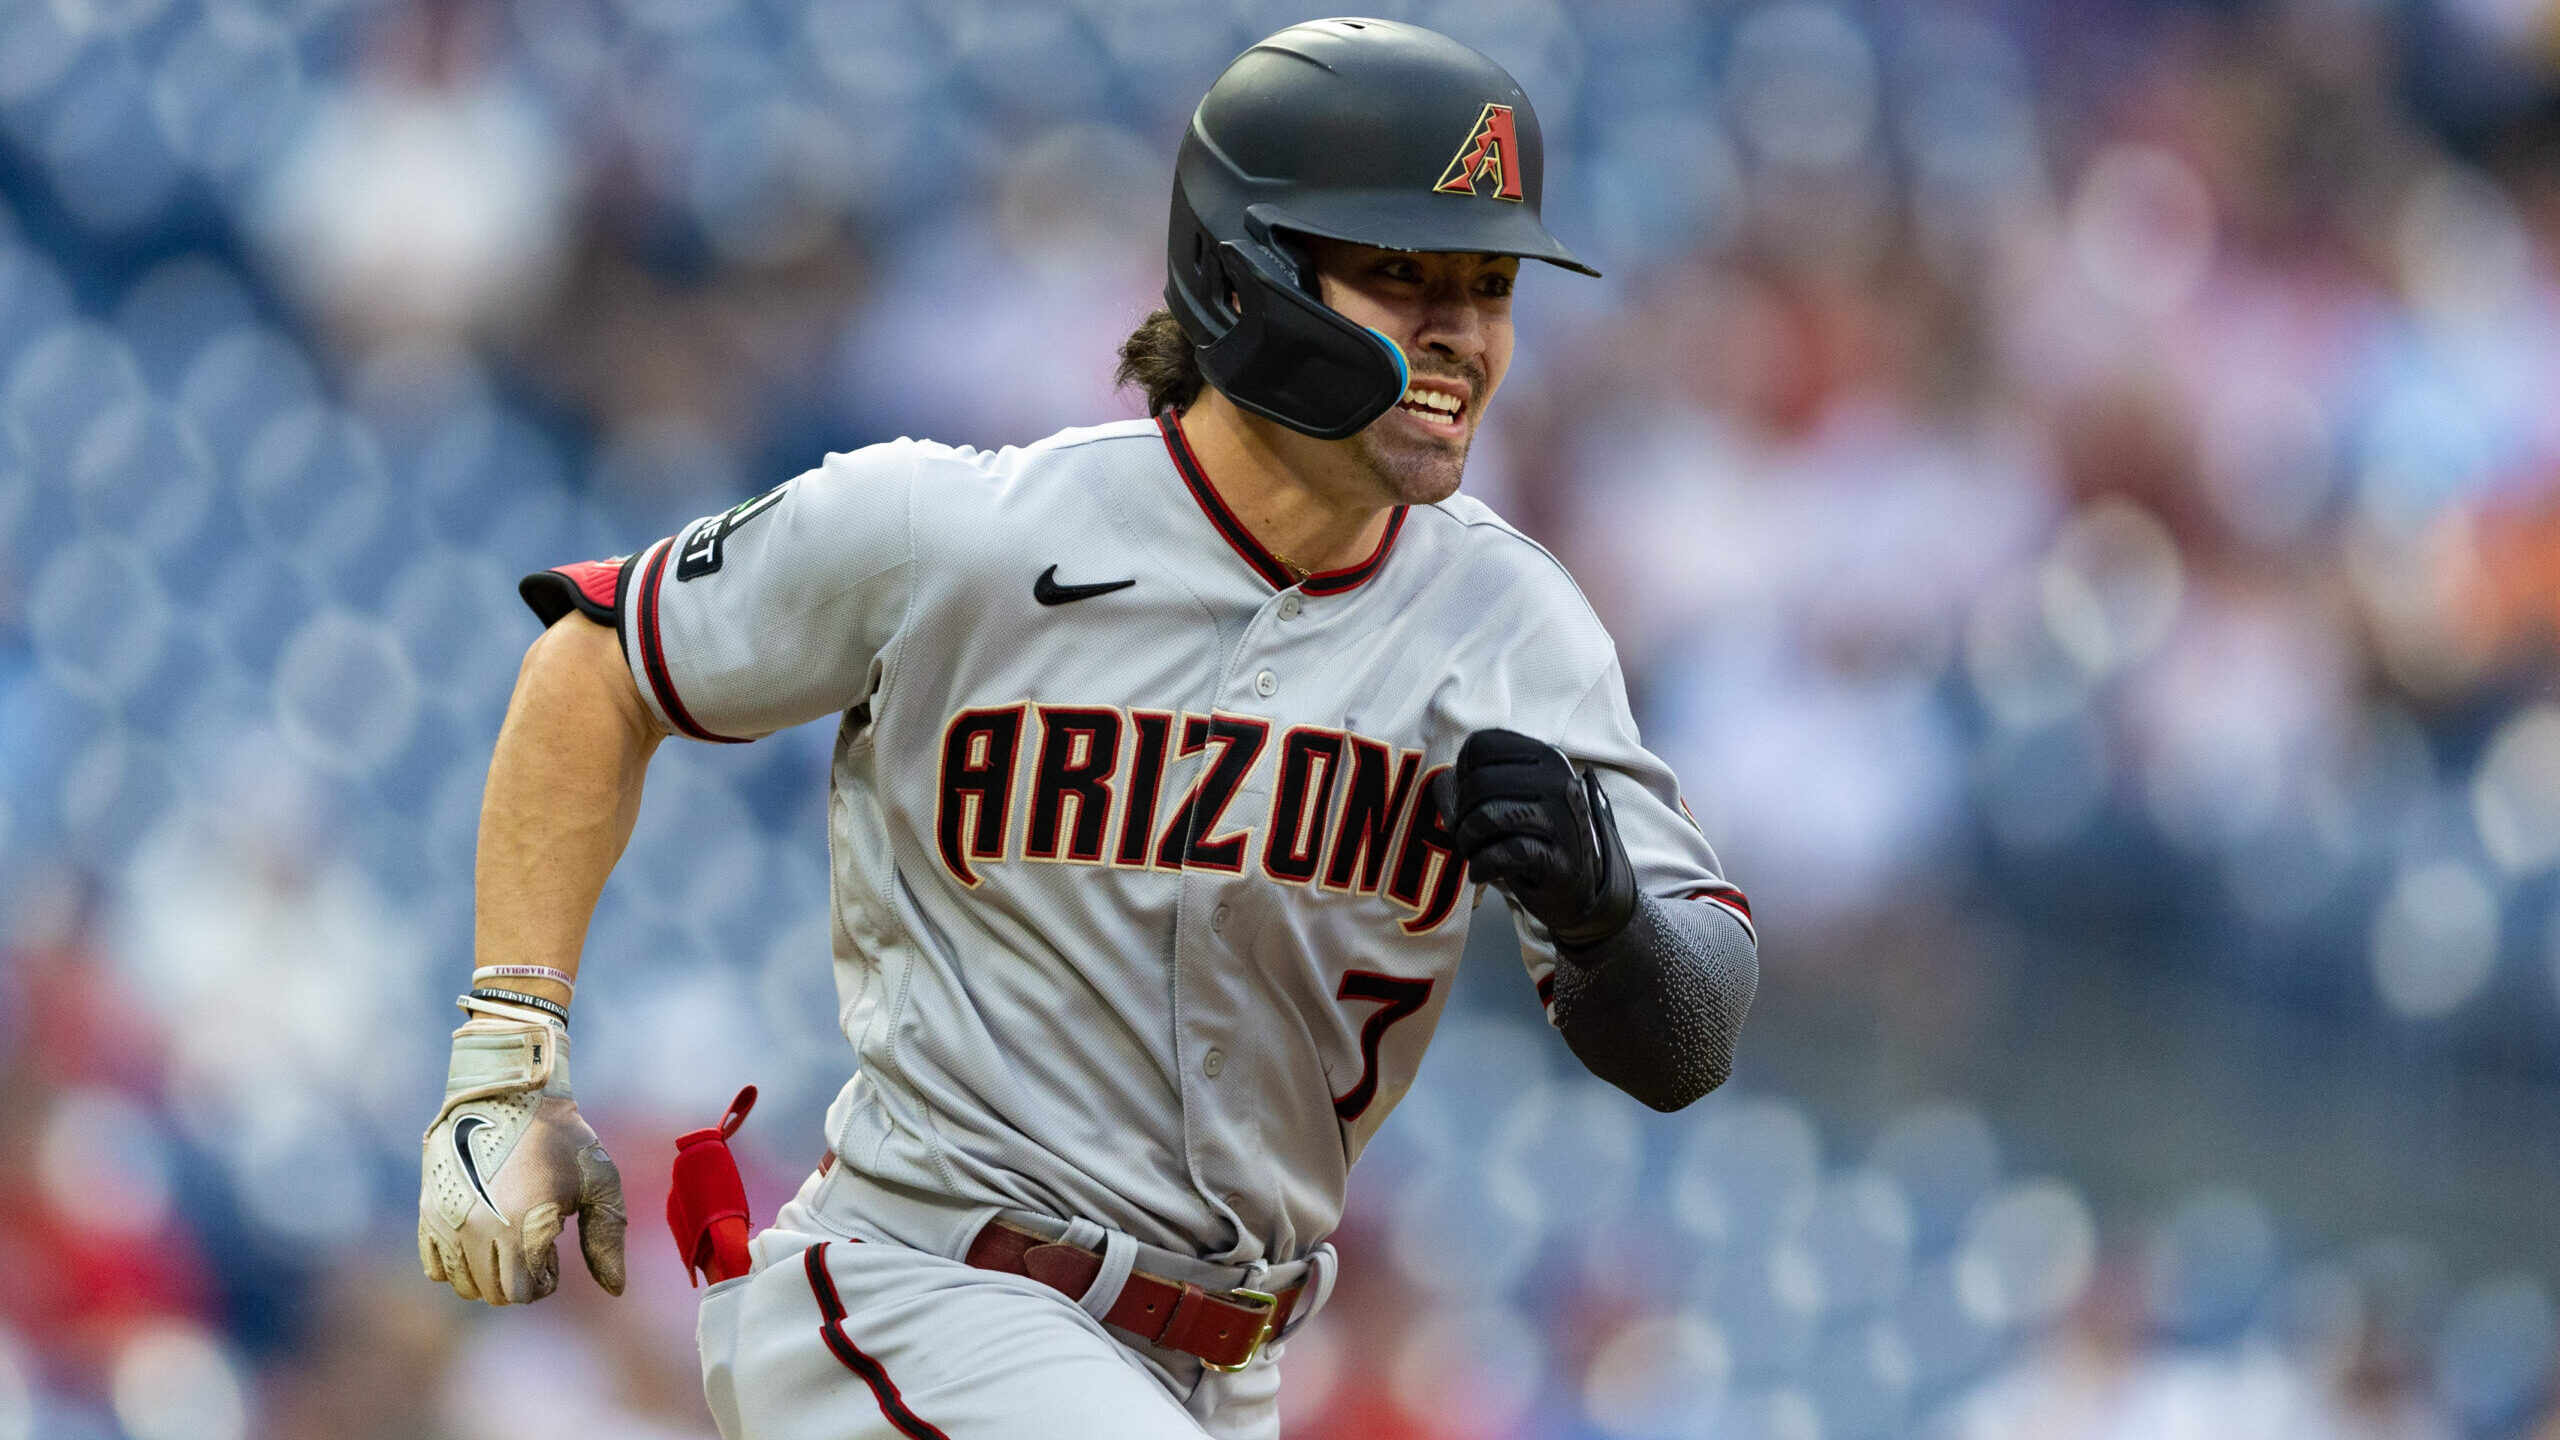 DNVR Rockies Podcast: Can Corbin Carroll & Arizona teach Colorado and take  NL West from Dodgers?